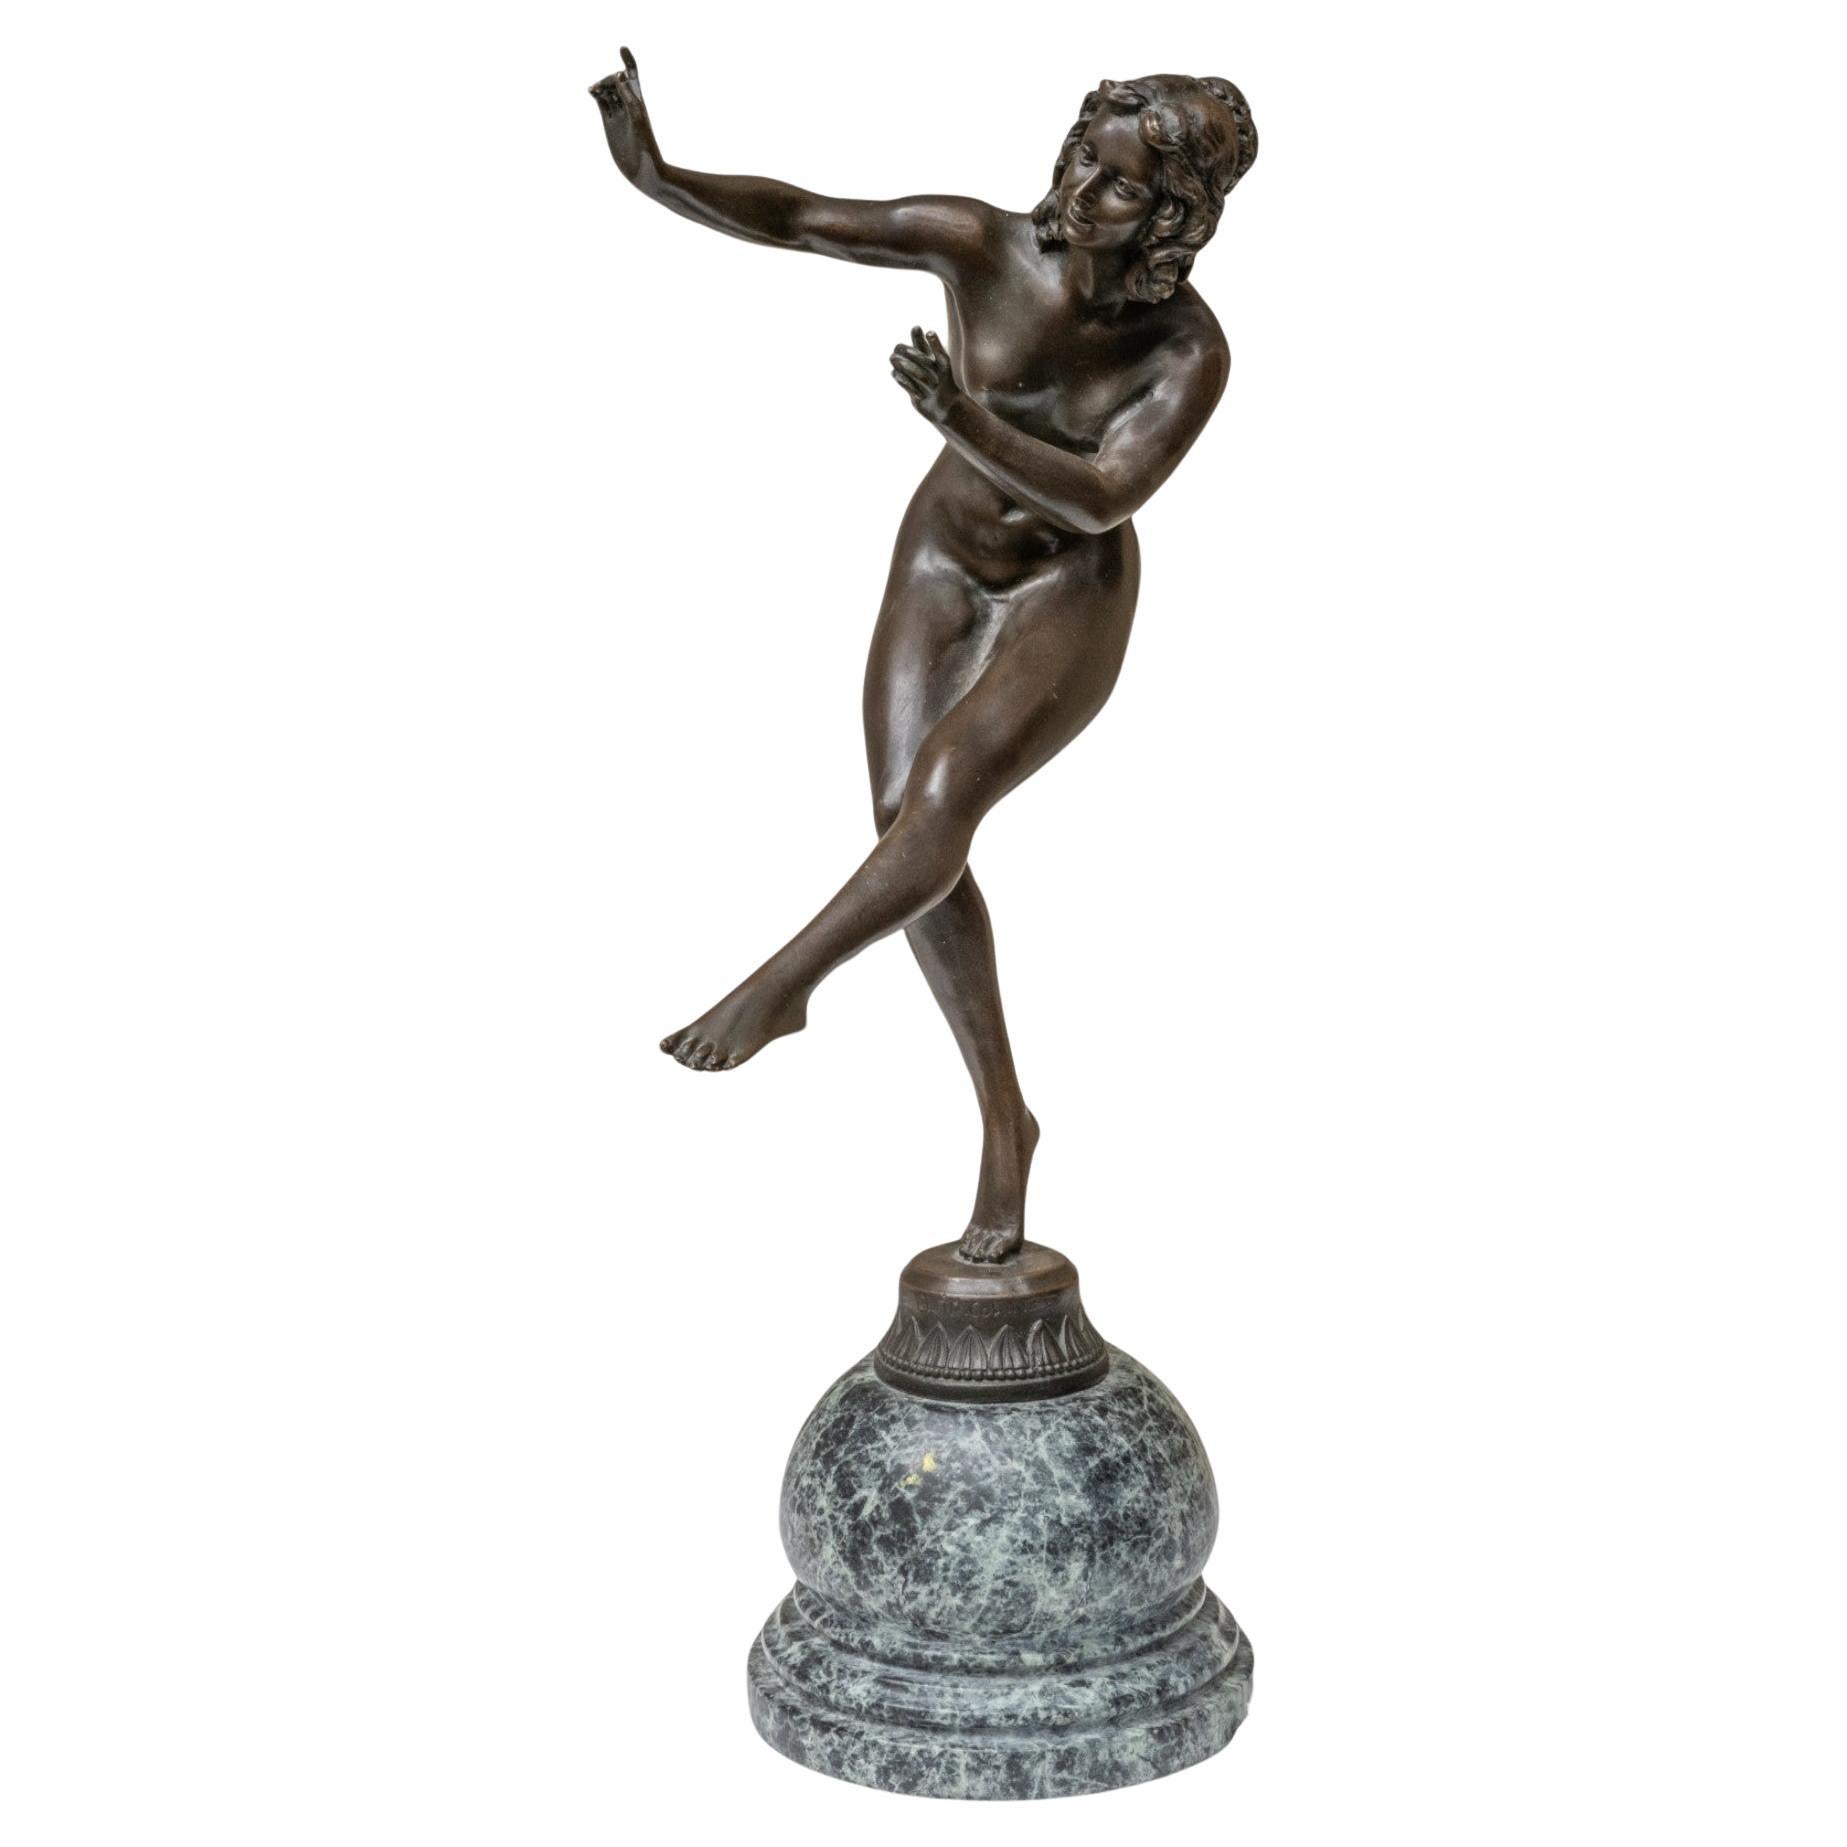 Claire Colinet, signed Early 20th Century Bronze Sculpture on Marble Plinth